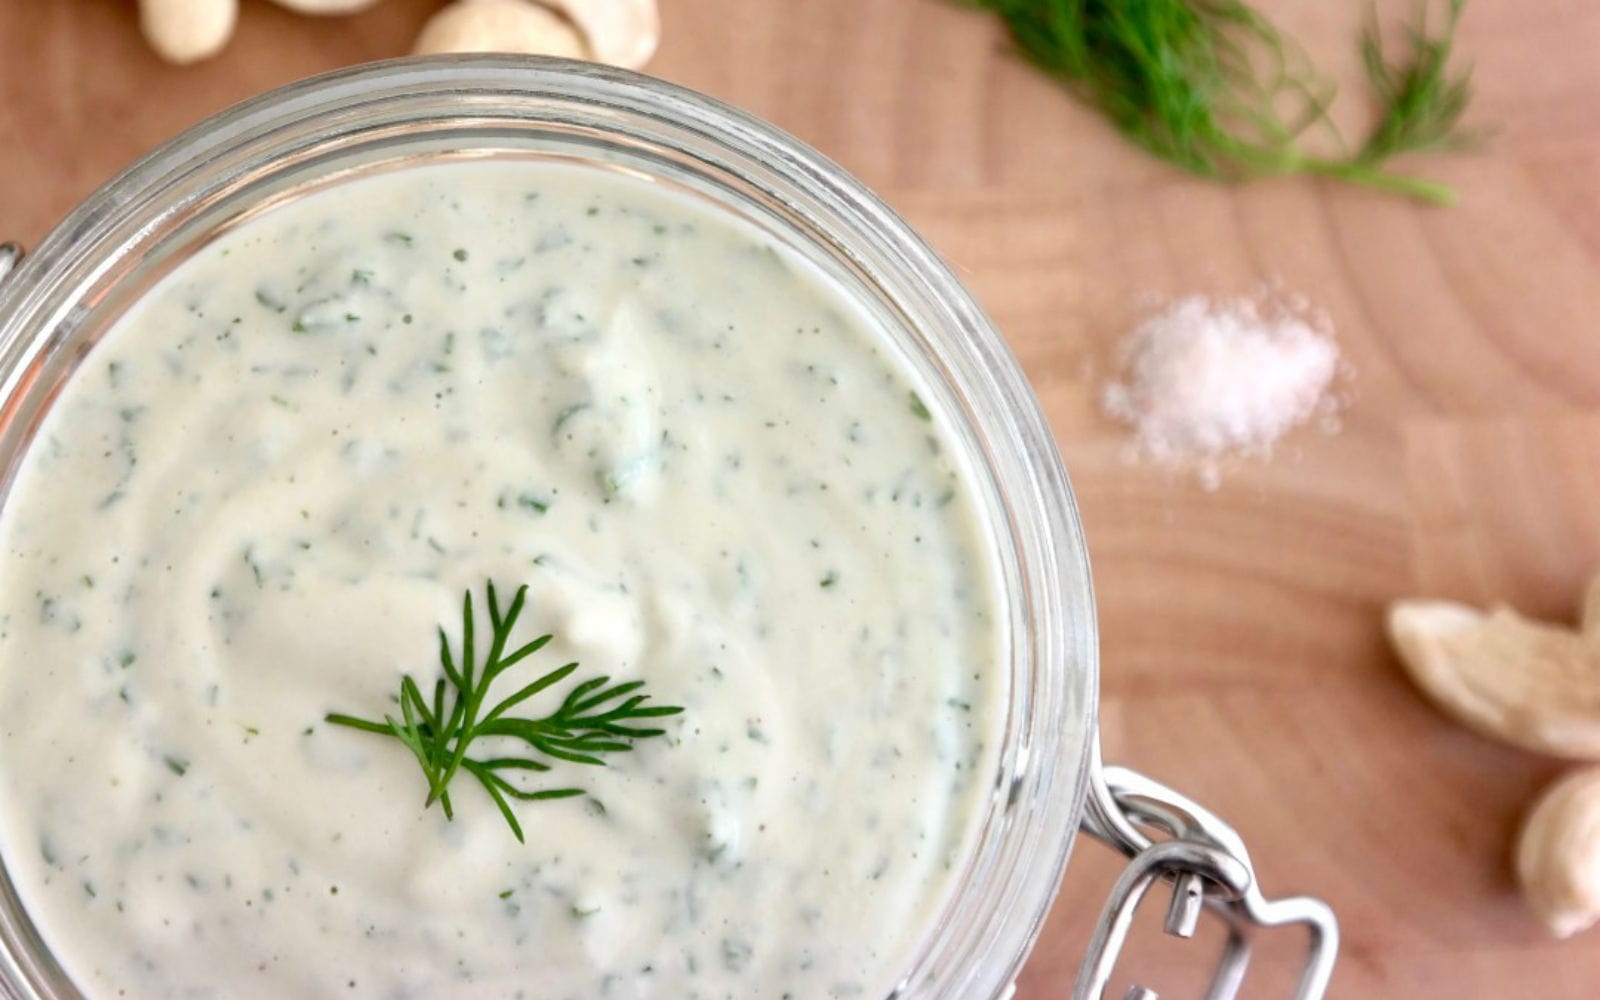 Vegan Gluten-Free Creamy Cucumber and Garlic Herb Dressing topped with dill